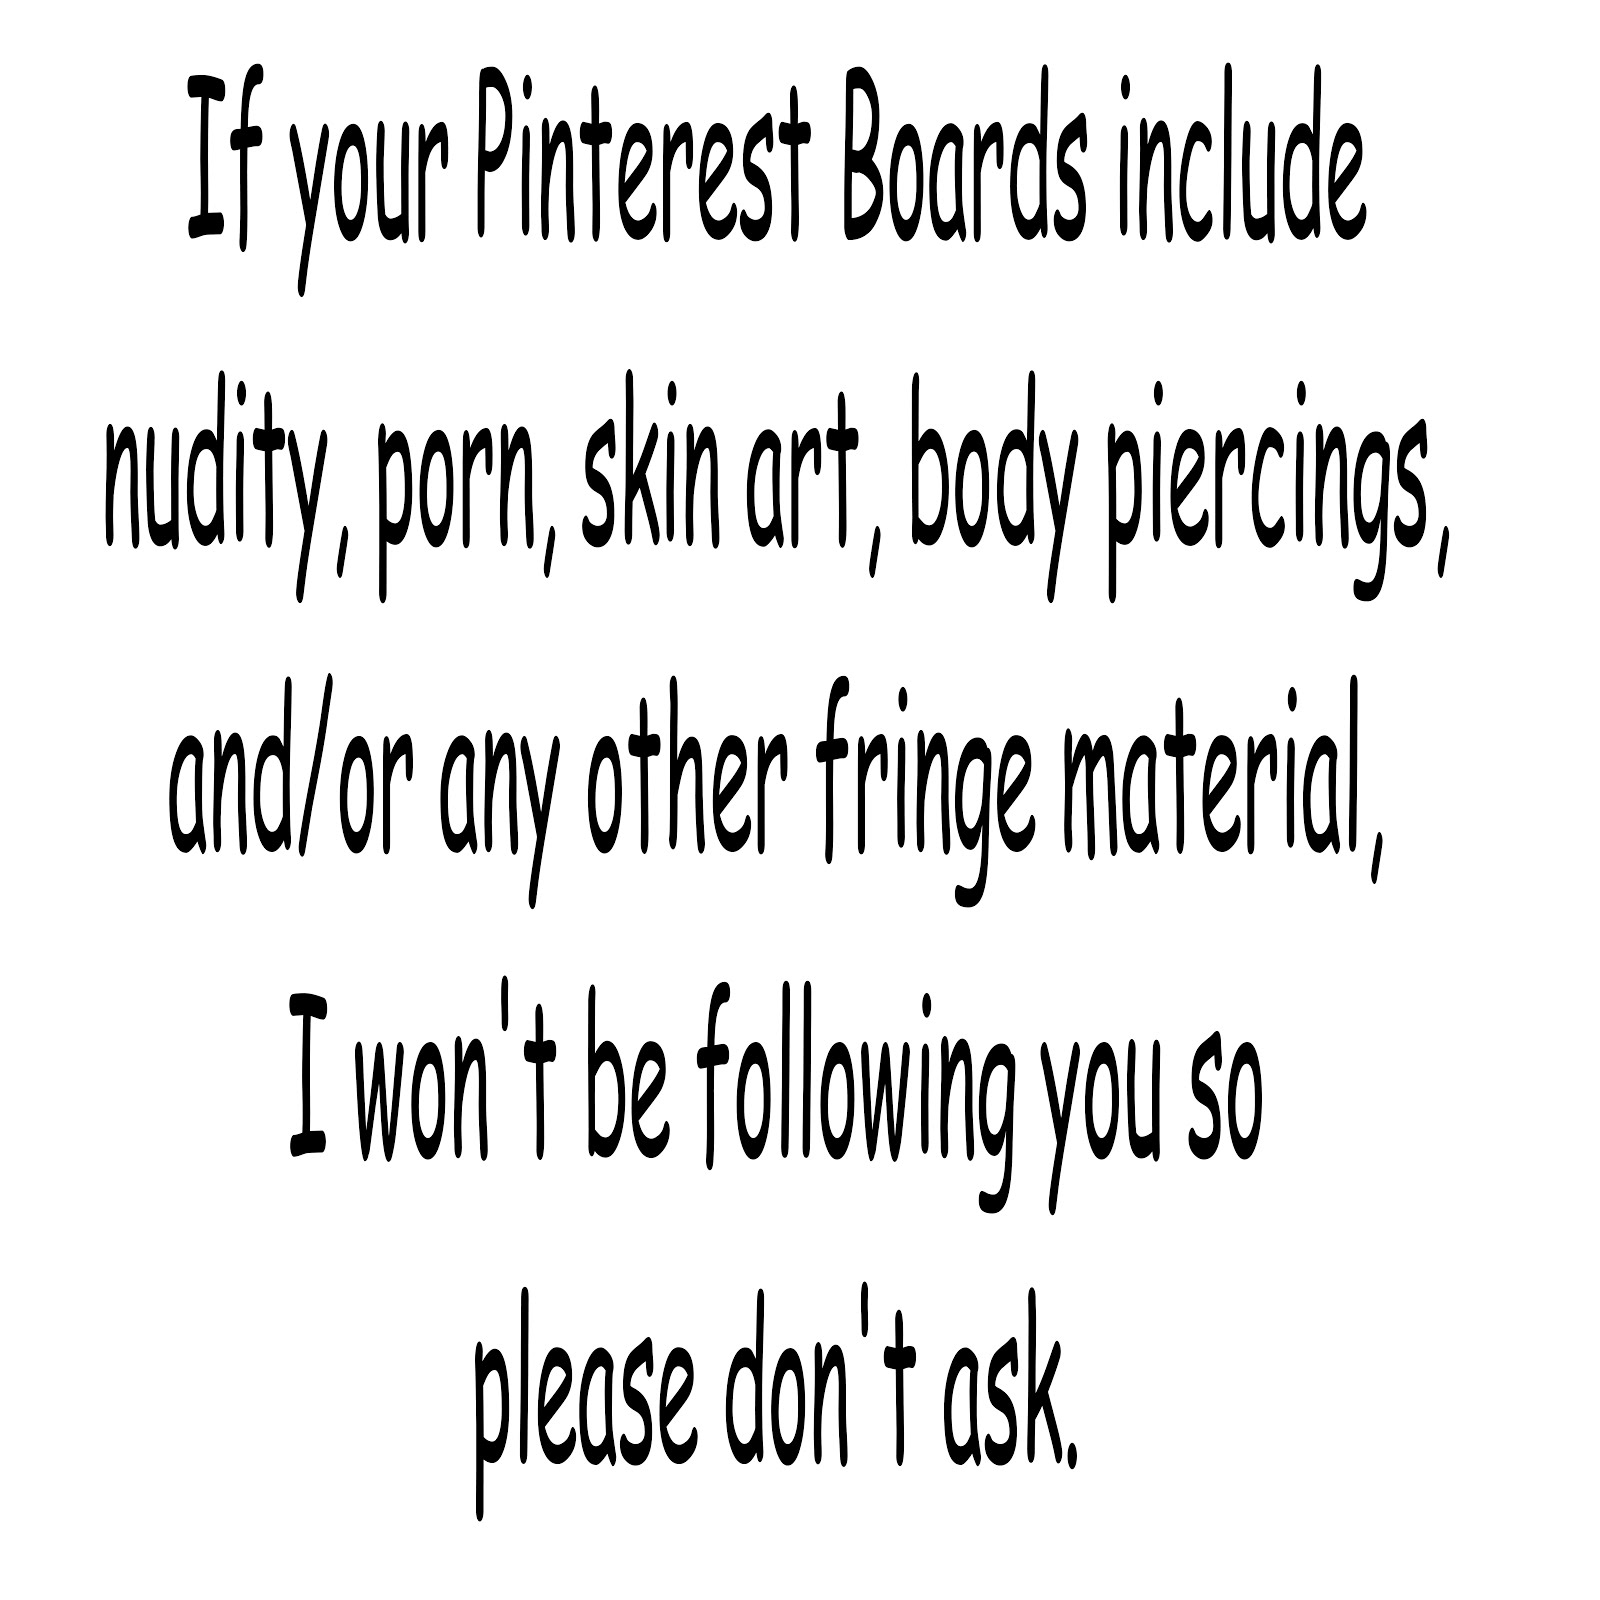 A Note About Pinterest